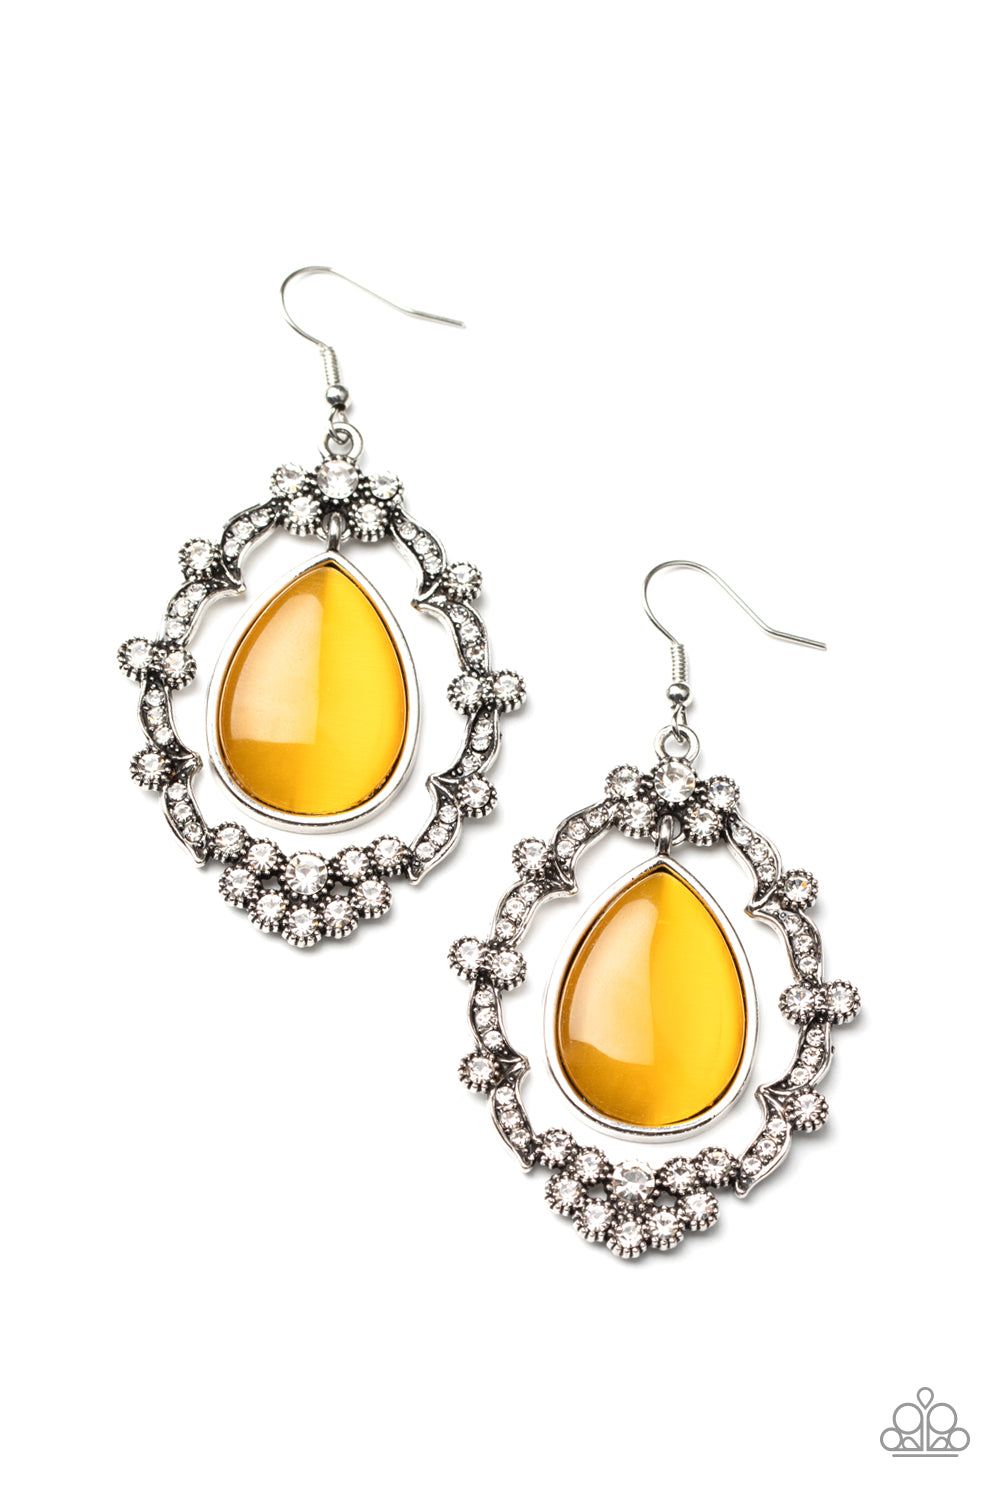 Icy Eden Yellow Earring - Paparazzi Accessories. A teardrop yellow cat's eye stone swings from the top of an ornately white rhinestone encrusted frame, creating an icy lure. Earring attaches to a standard fishhook fitting.  ﻿All Paparazzi Accessories are lead free and nickel free!  Sold as one pair of earrings. 